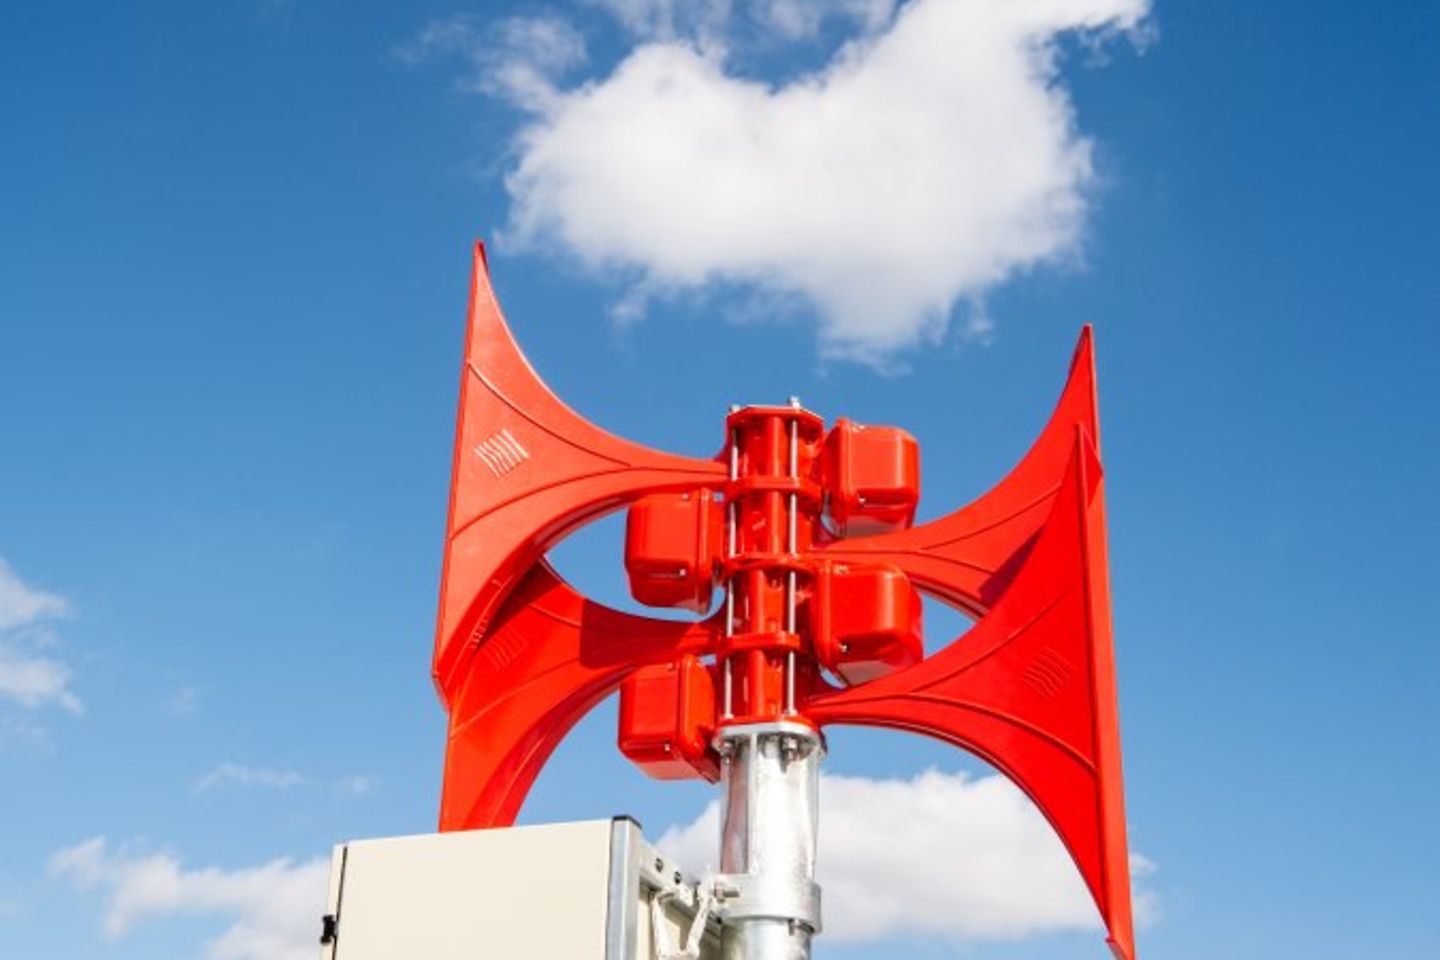 Emergency warning siren for fire department and disaster control